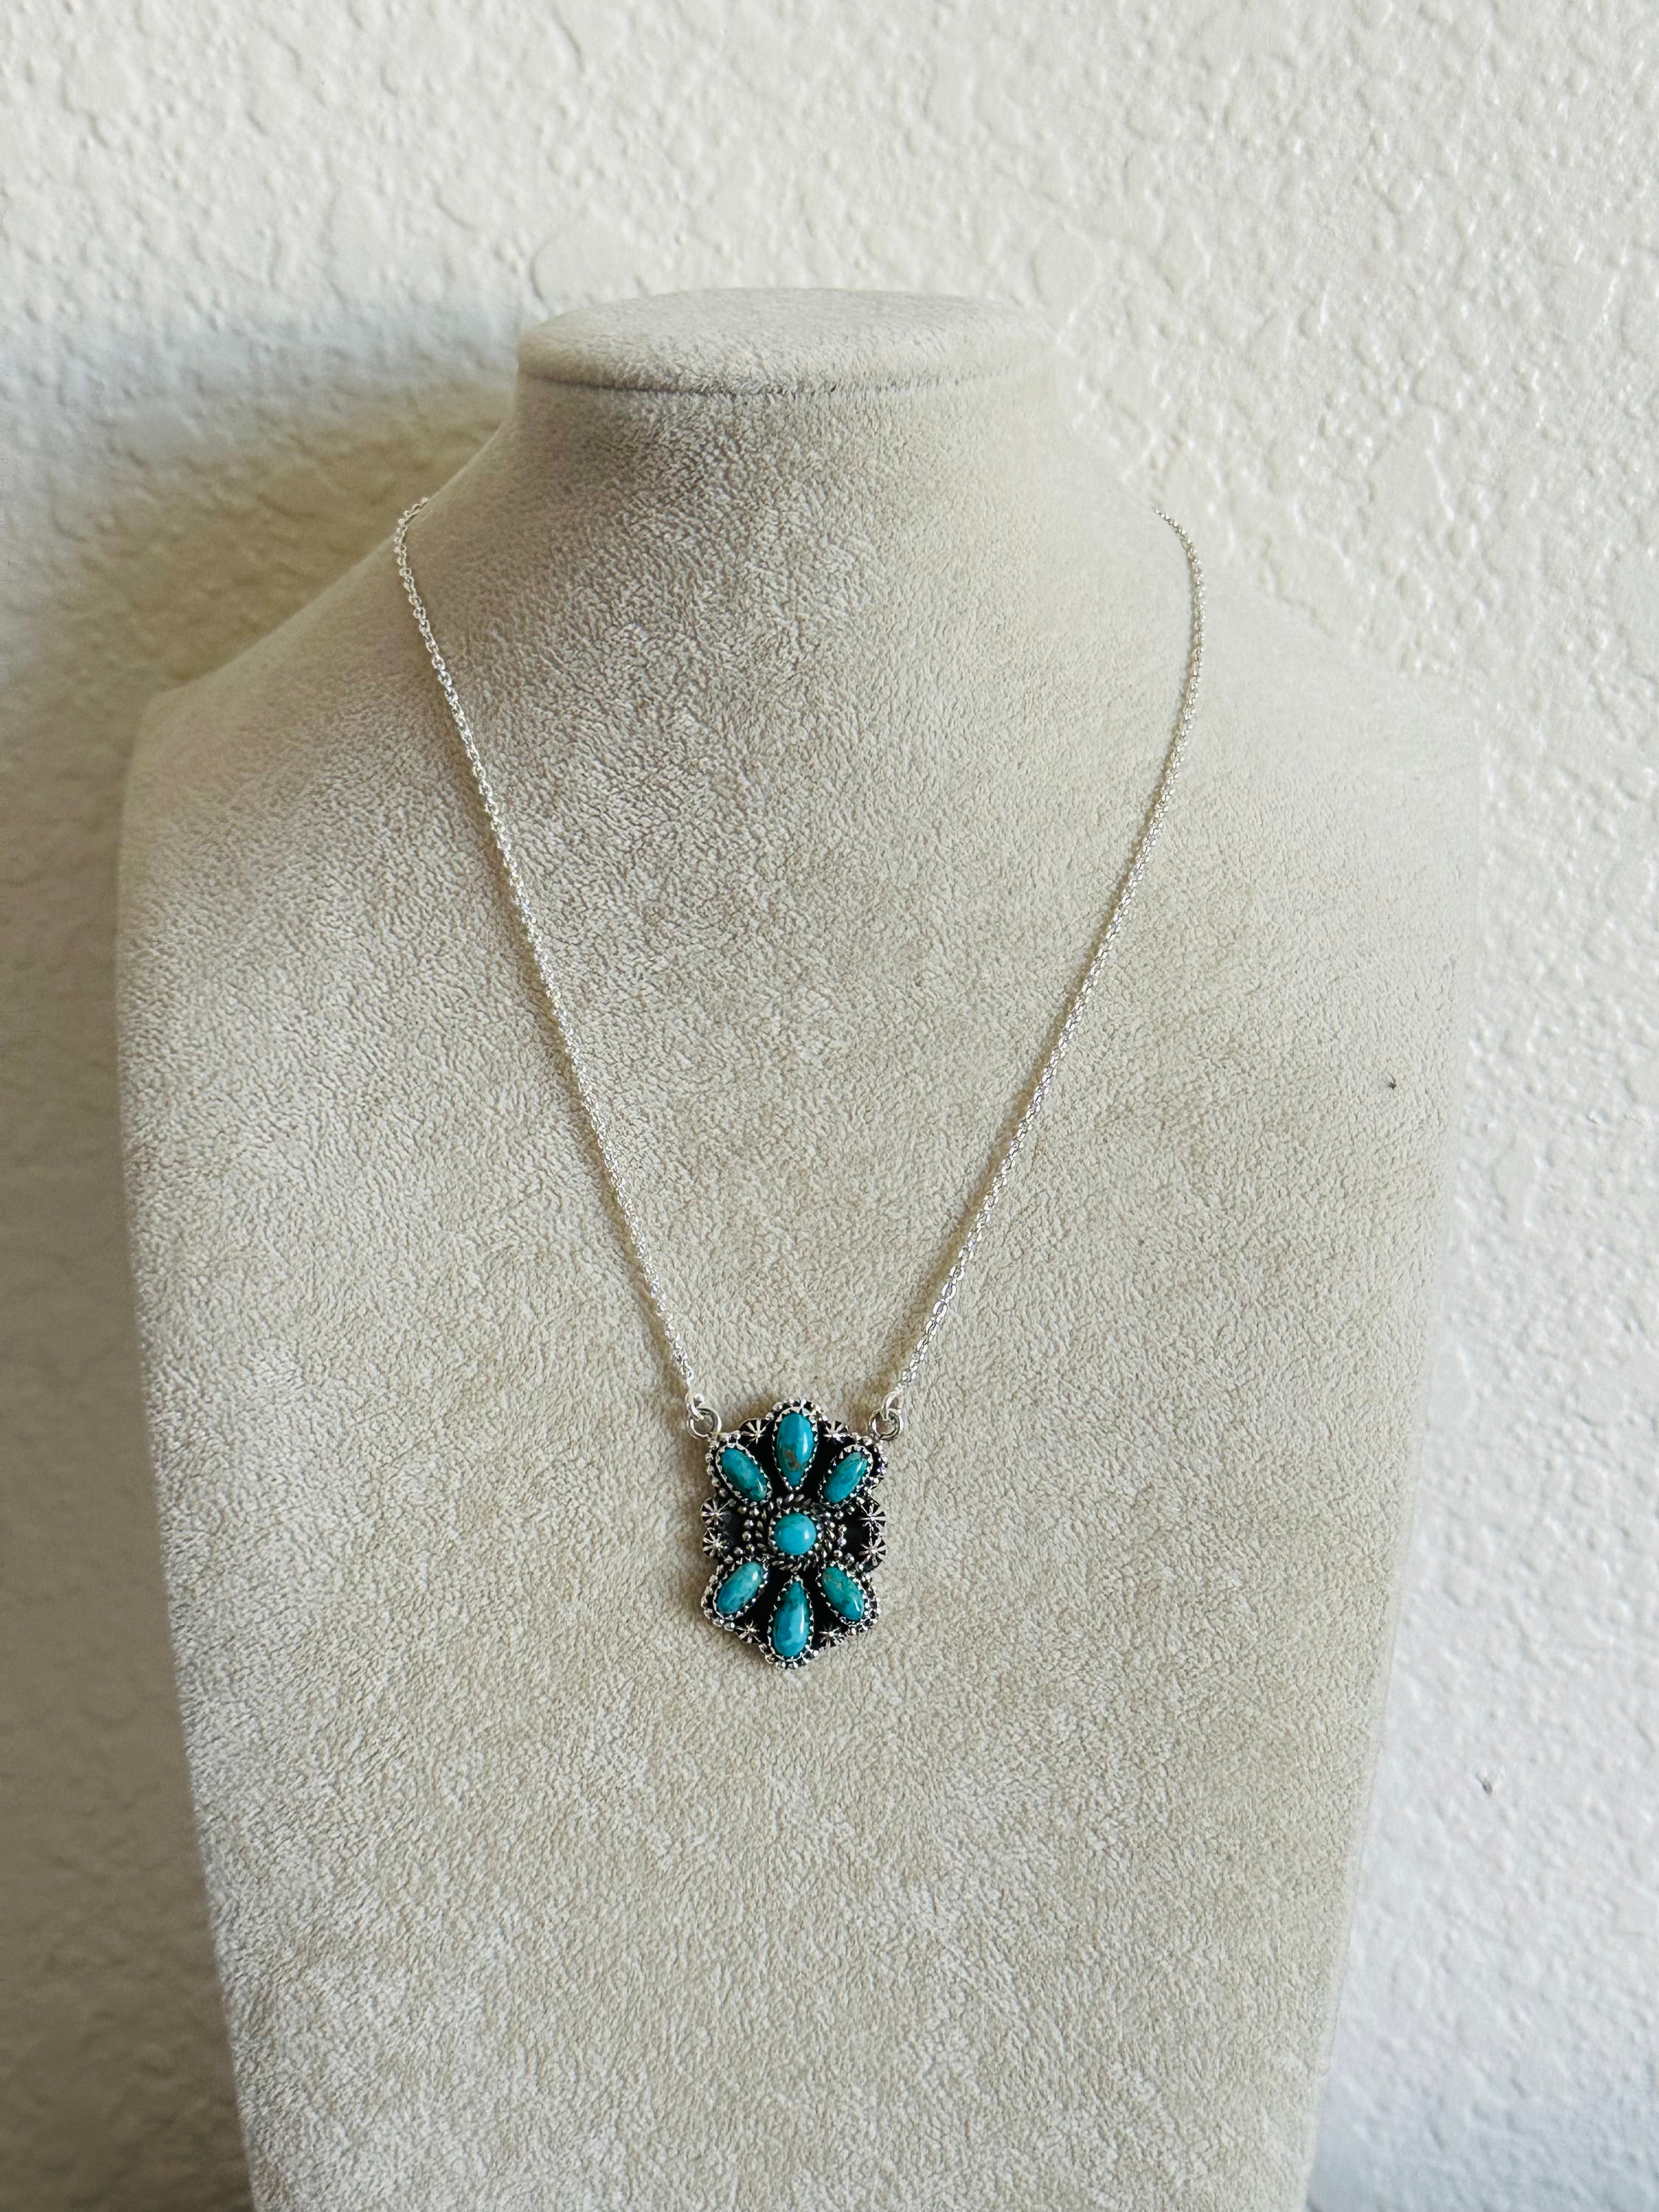 TTD “Sky Cascade” Kingman Turquoise & Sterling Silver Cluster Necklace